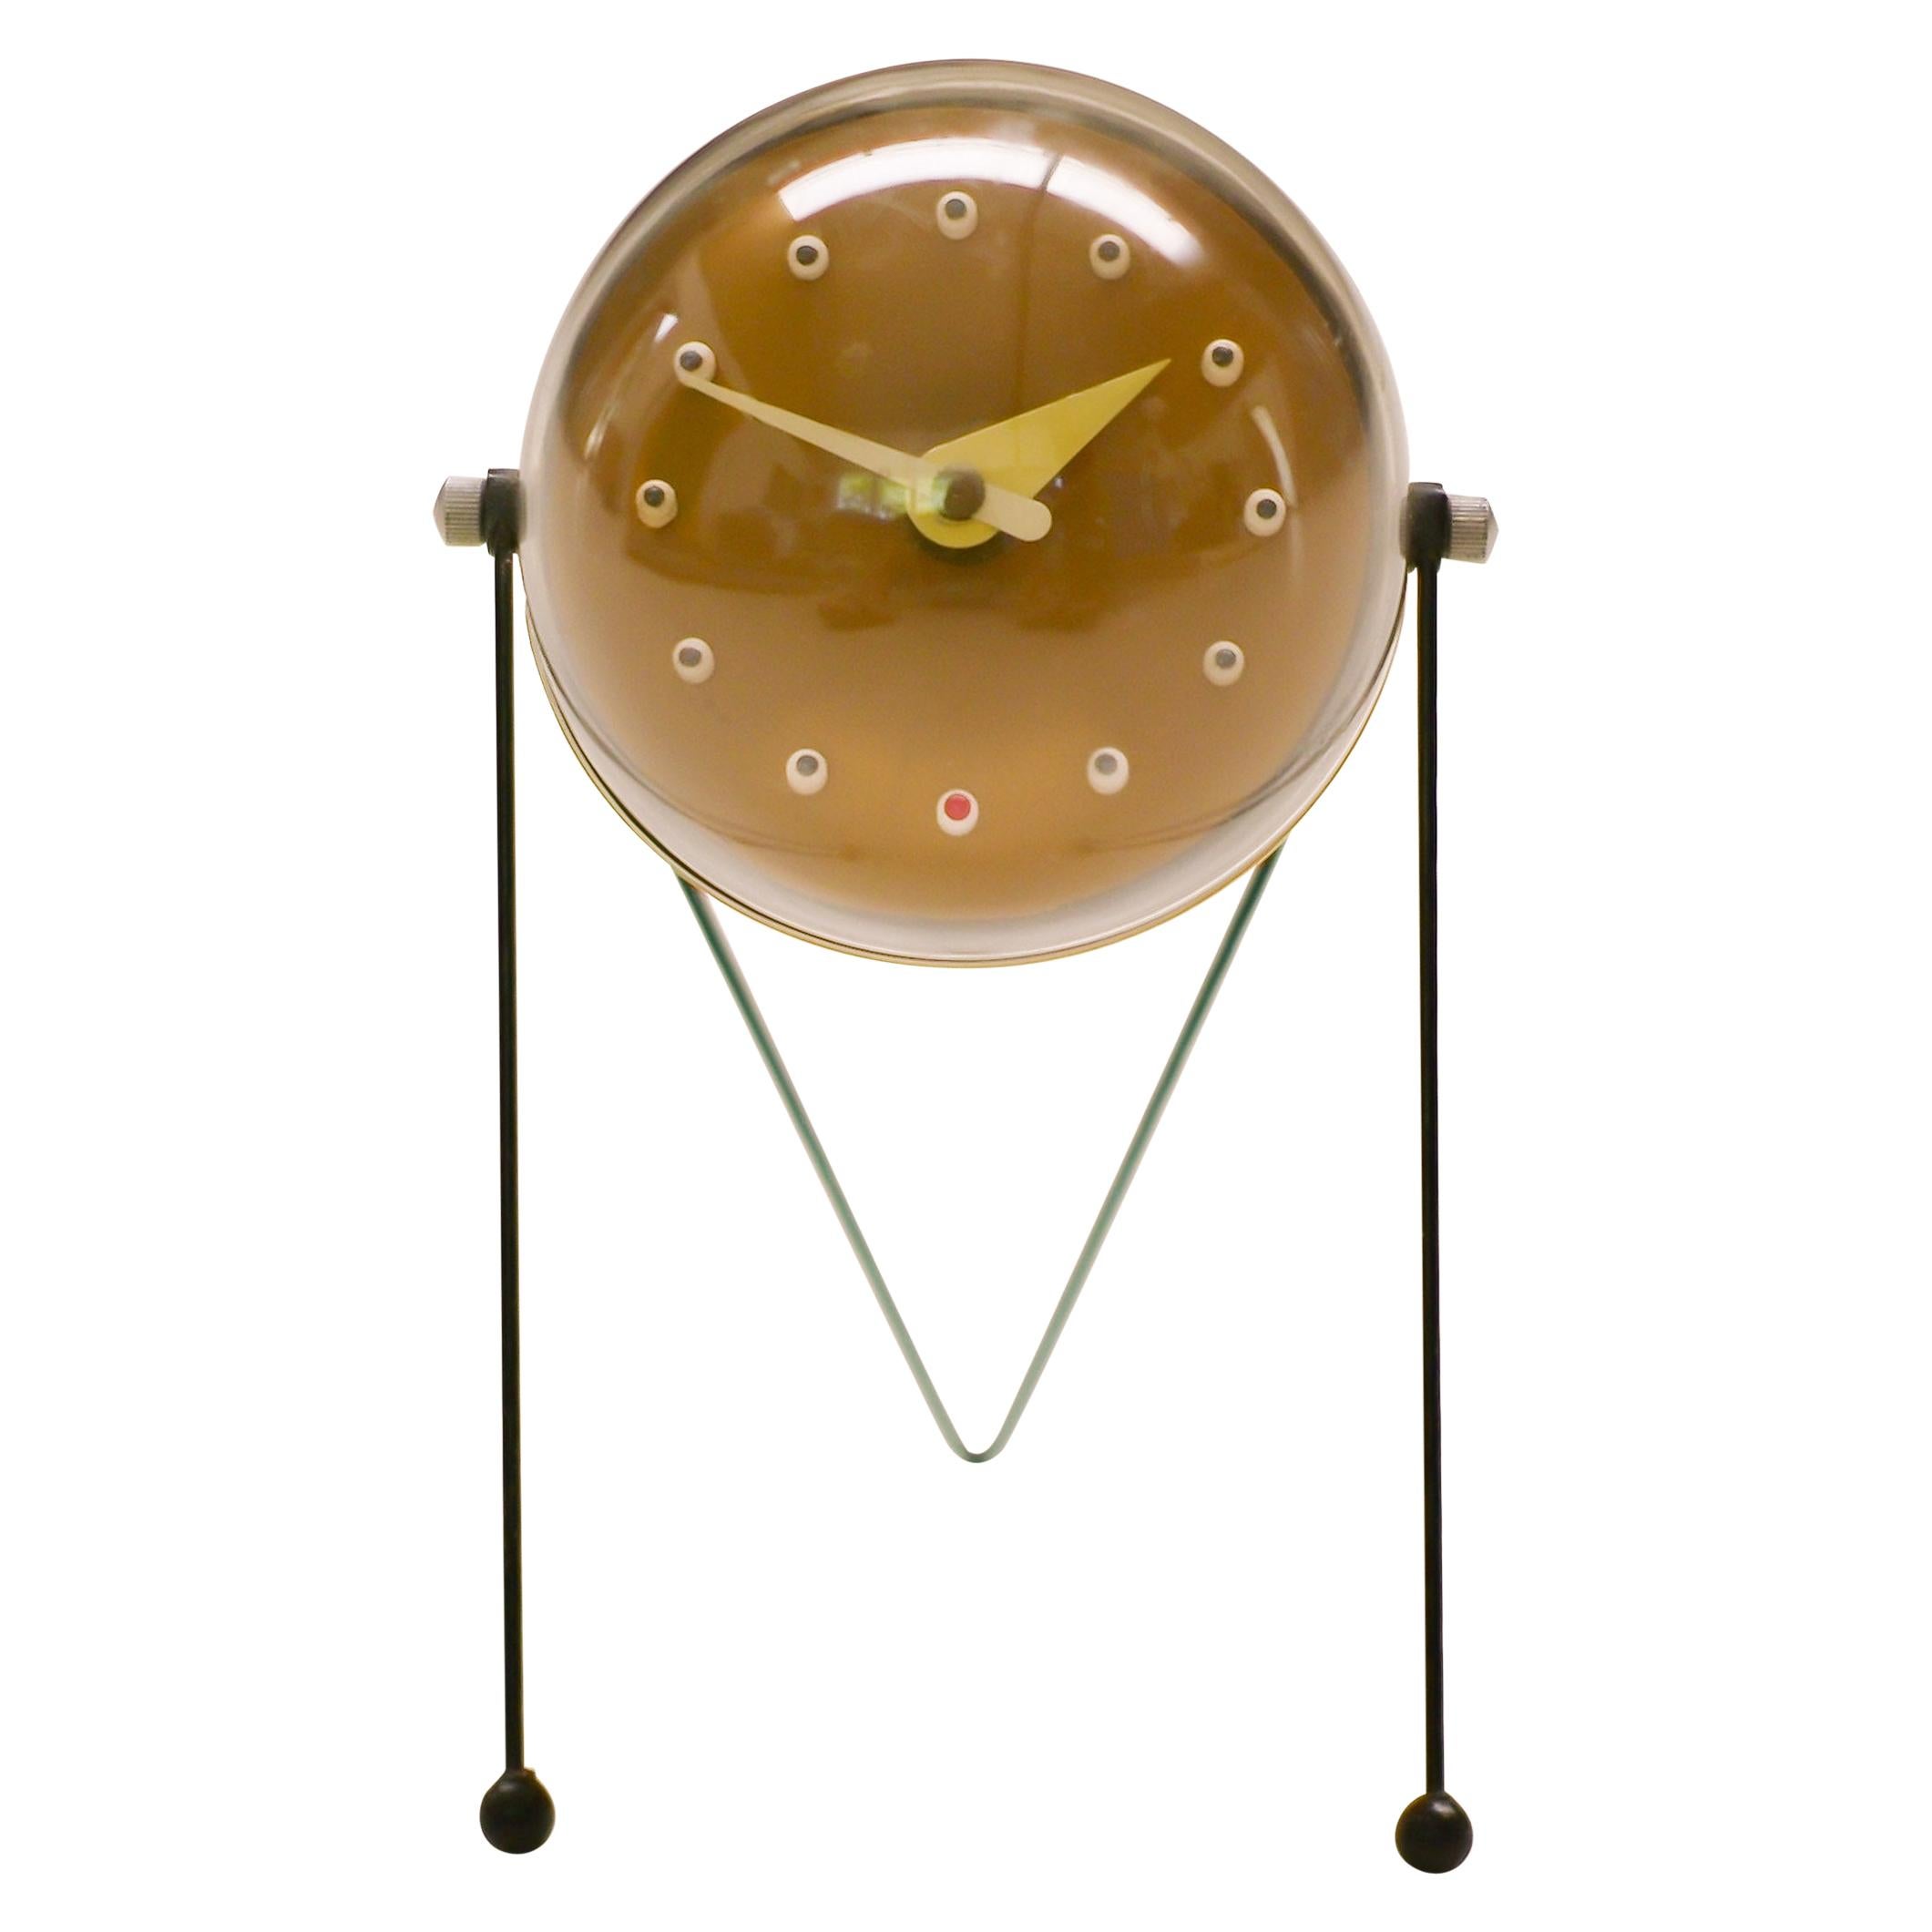 1950s Atomic Inspired Table Clock